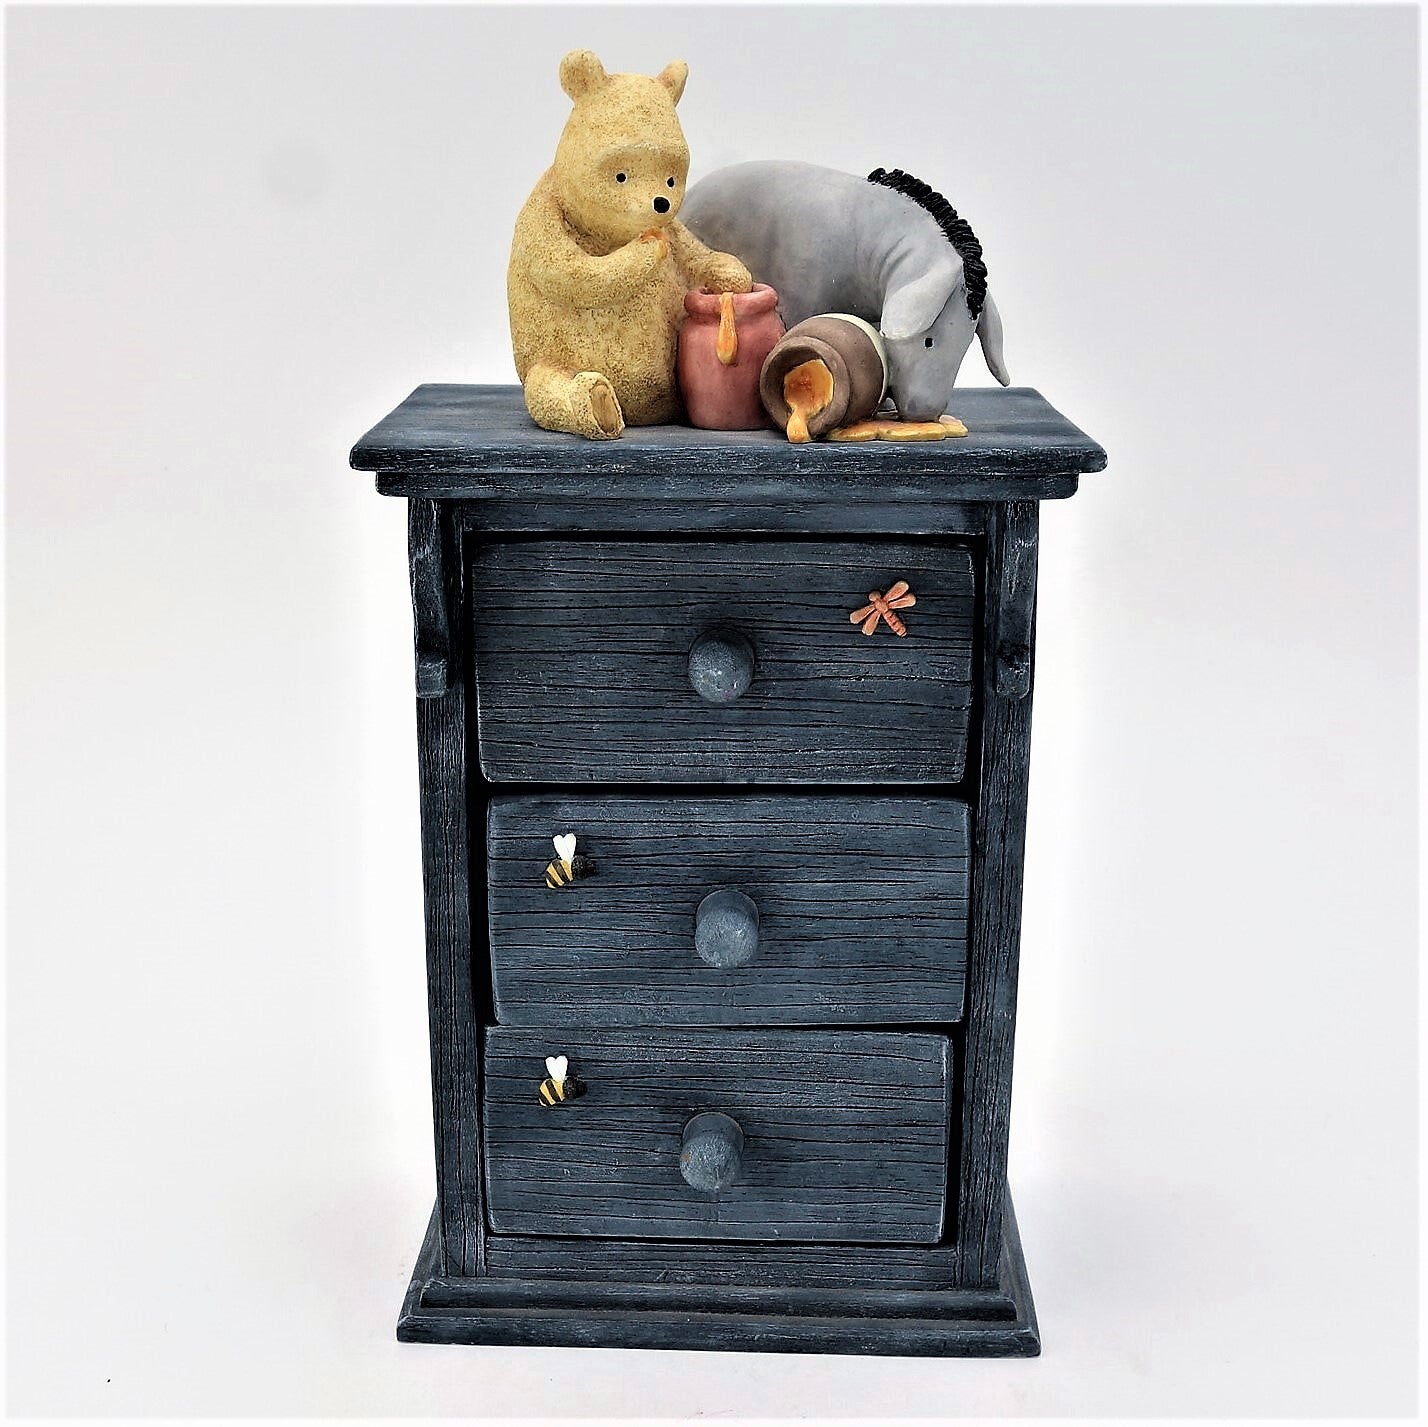 Winnie The Pooh And Eeyore Chest Of Drawers Honey Pots Trinket Box